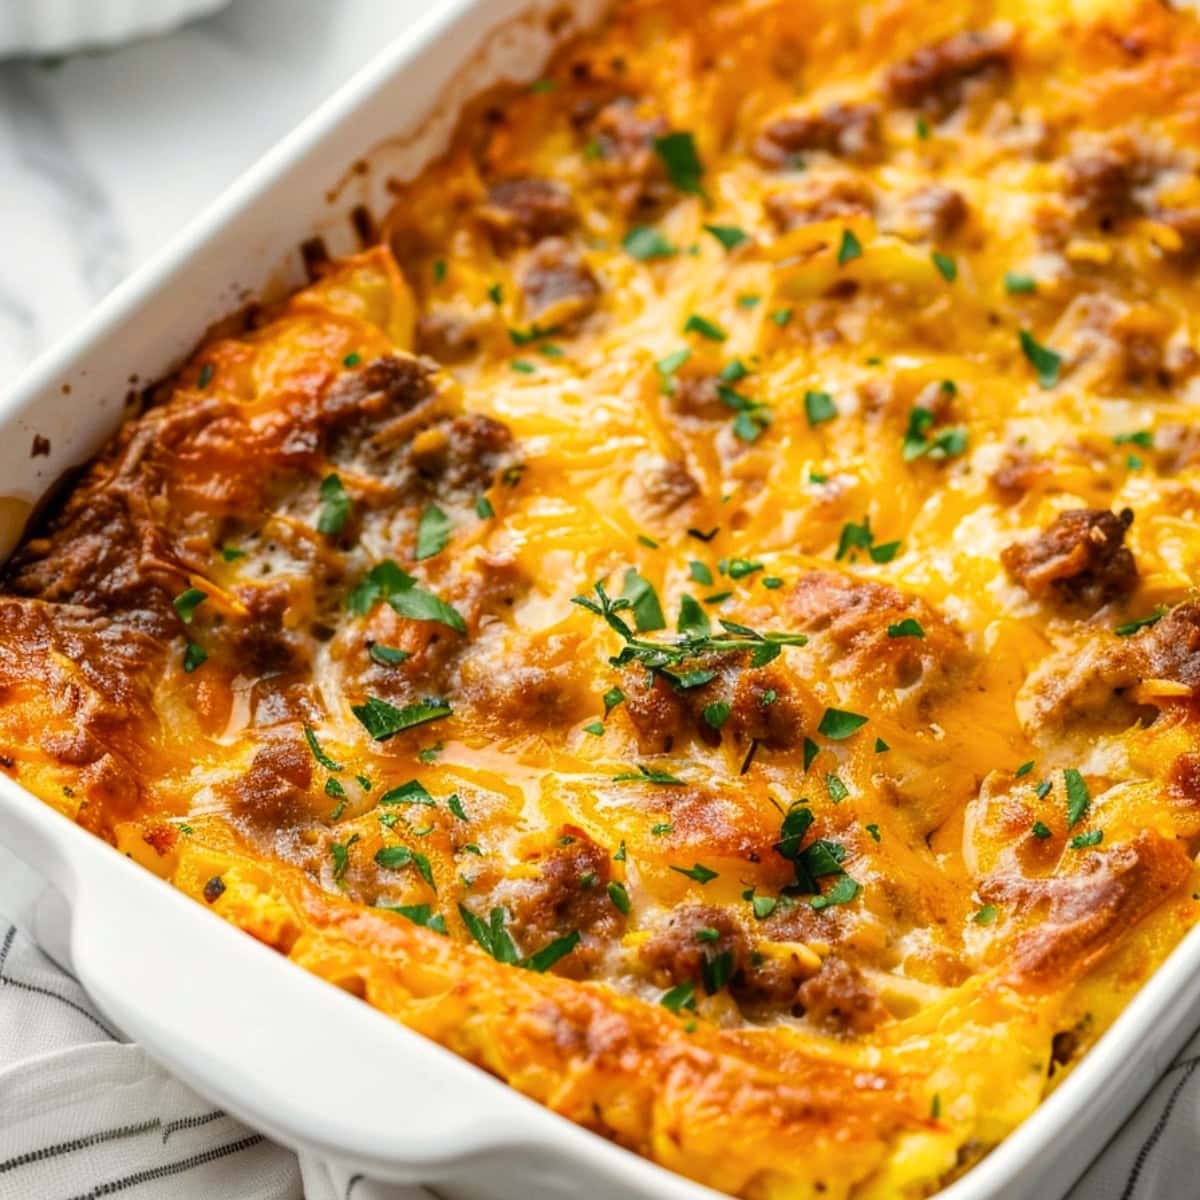 Sausage hashbrown breakfast
casserole in a baking dish garnished with chopped parsley.